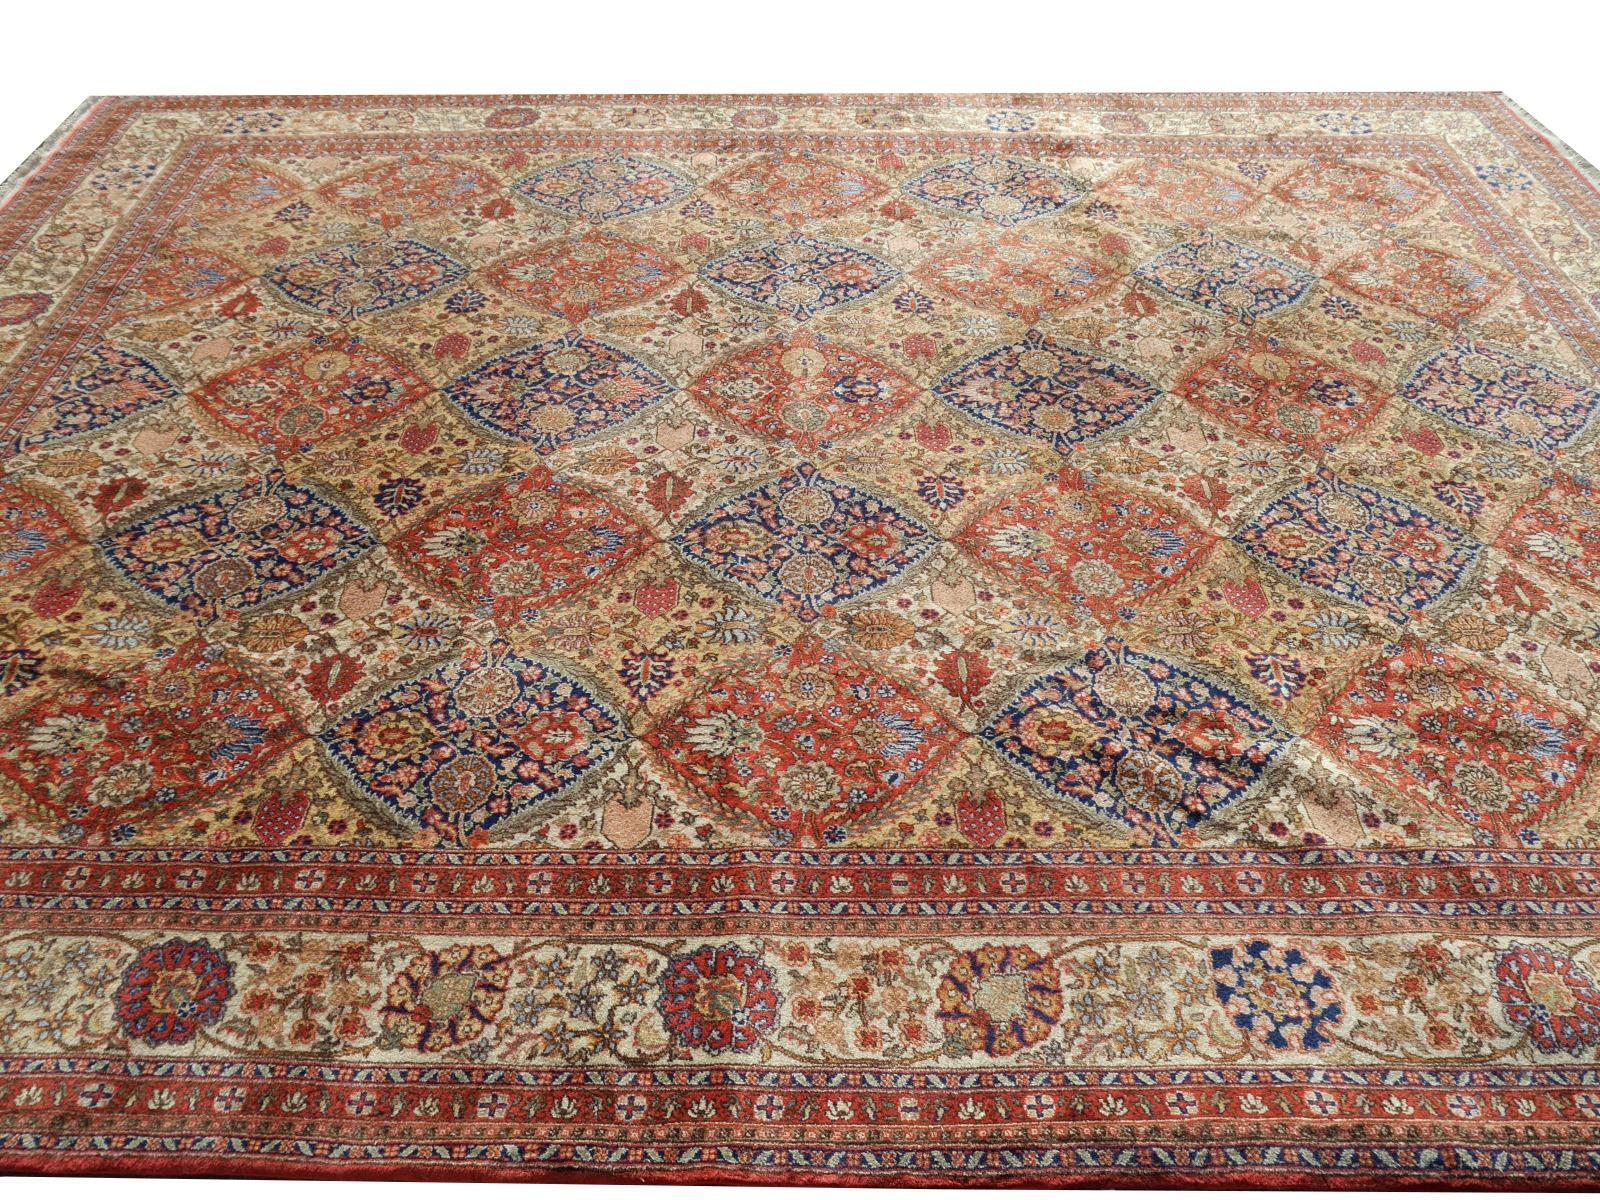 Romanian Kerman Style European Hand Knotted Rug 13 x 10 ft Djoharian Collection For Sale